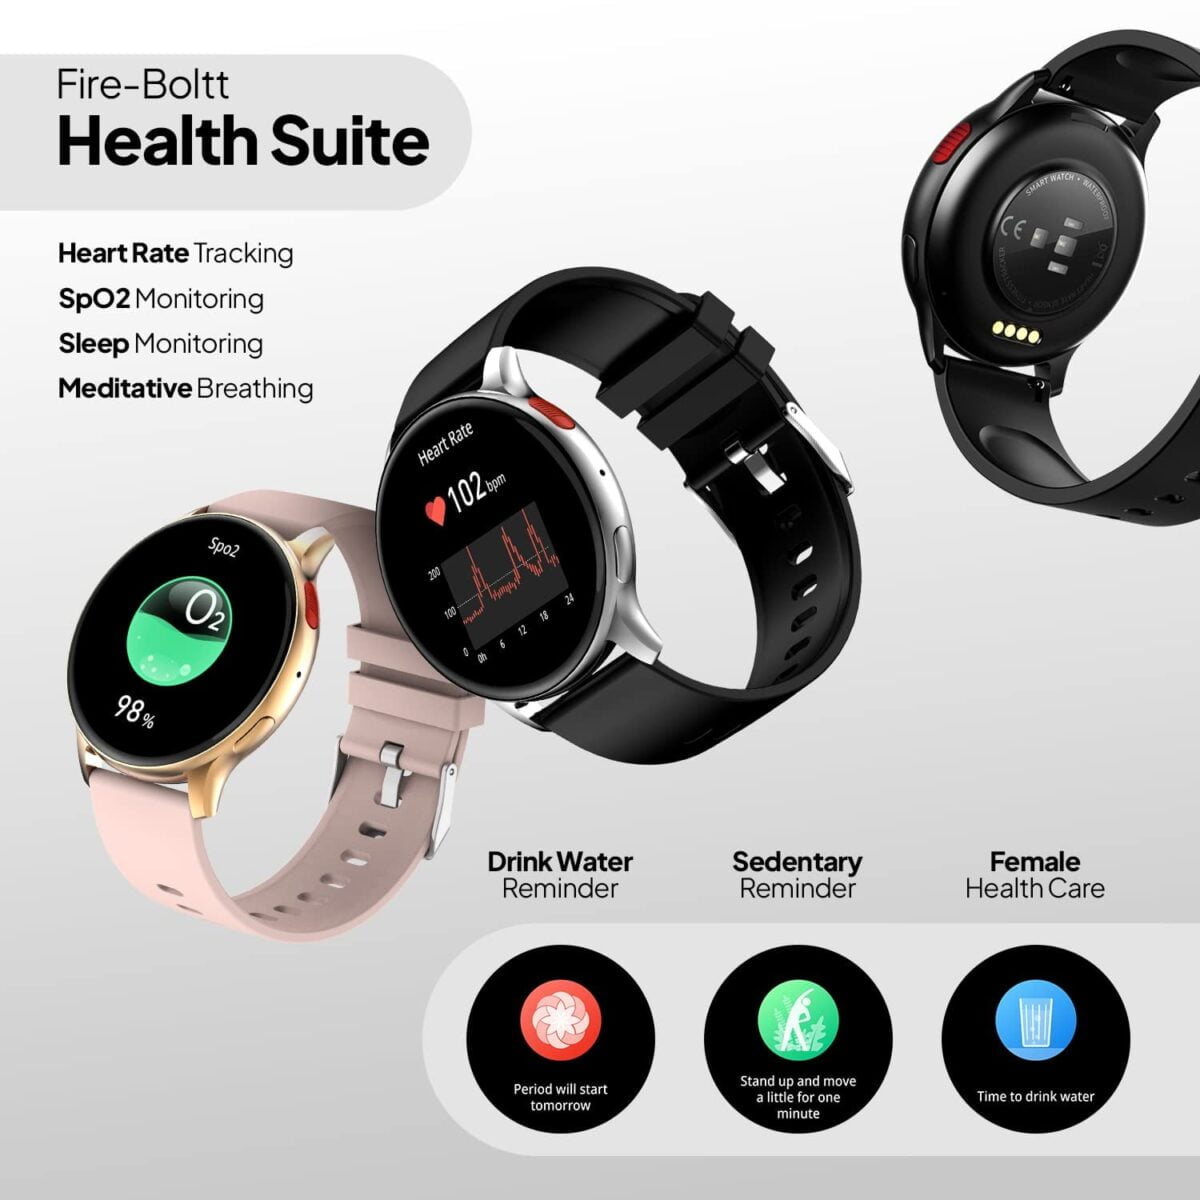 Fire boltt eclipse 1. 43 amoled smartwatch gold pink 11 shop mobile accessories online in india